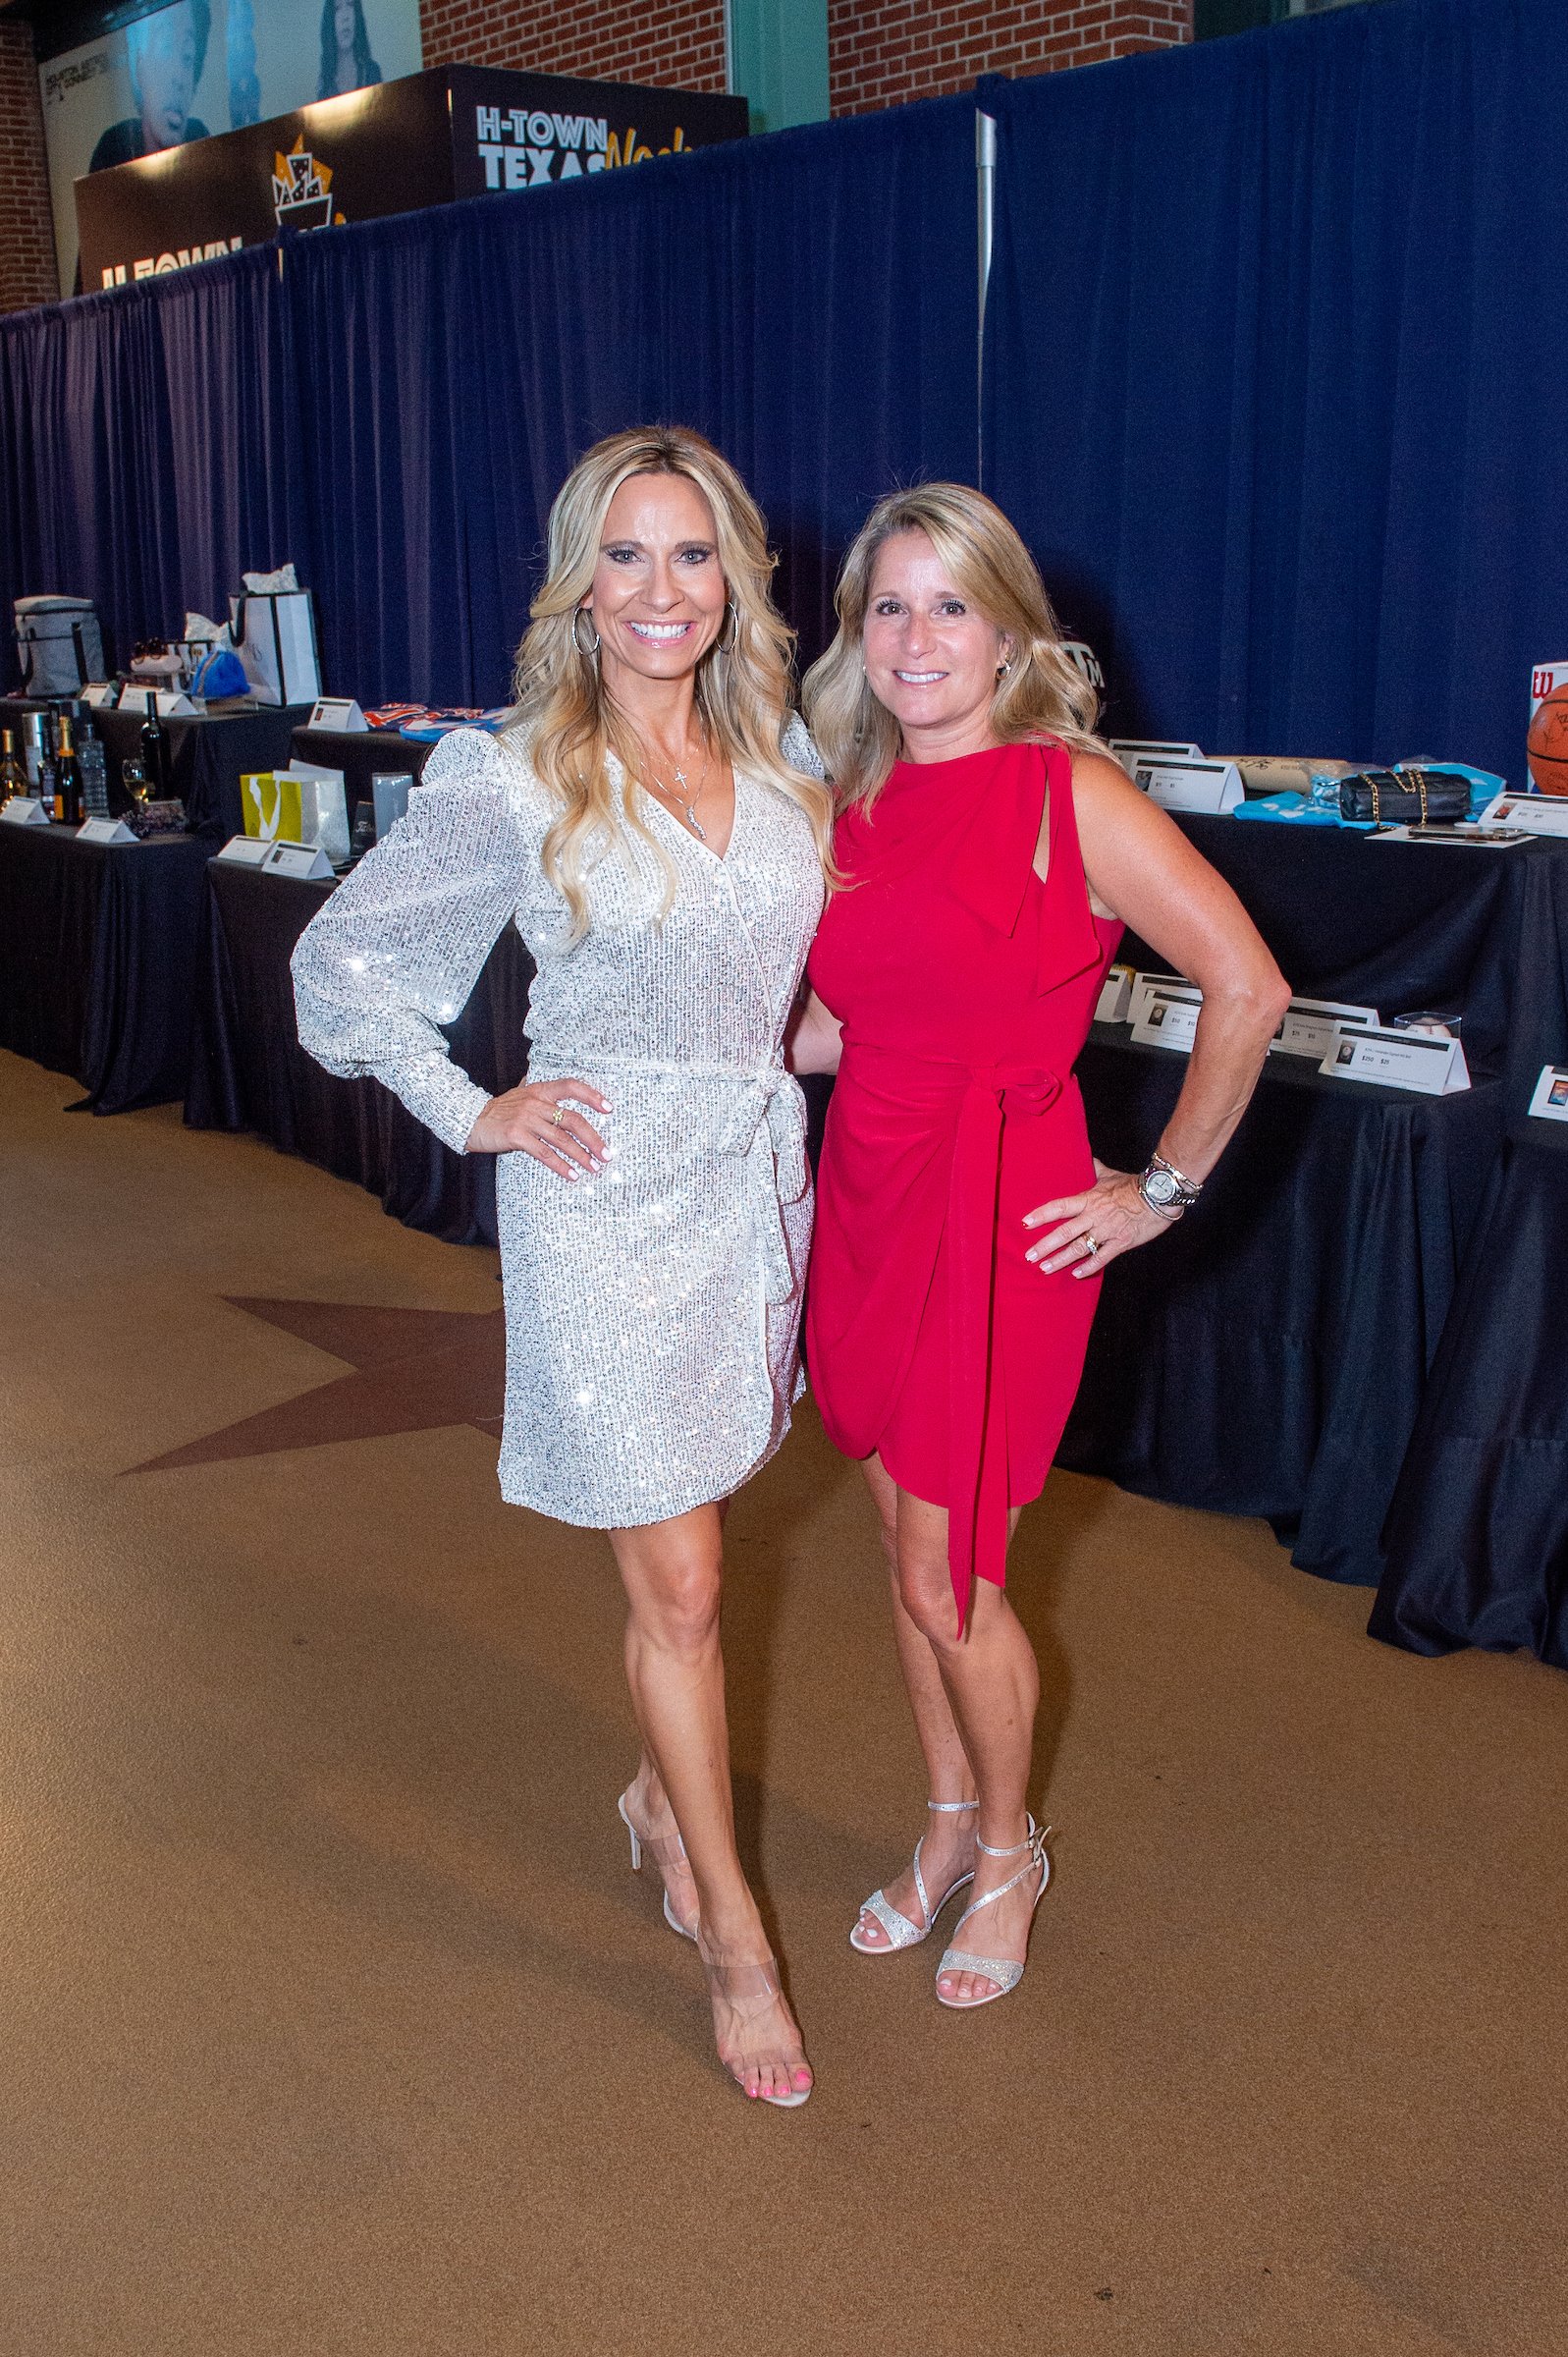 Astros' stars and better halves band together to raise $600,000 in support  of Joe Smith and wife Allie LaForce's philanthropic mission